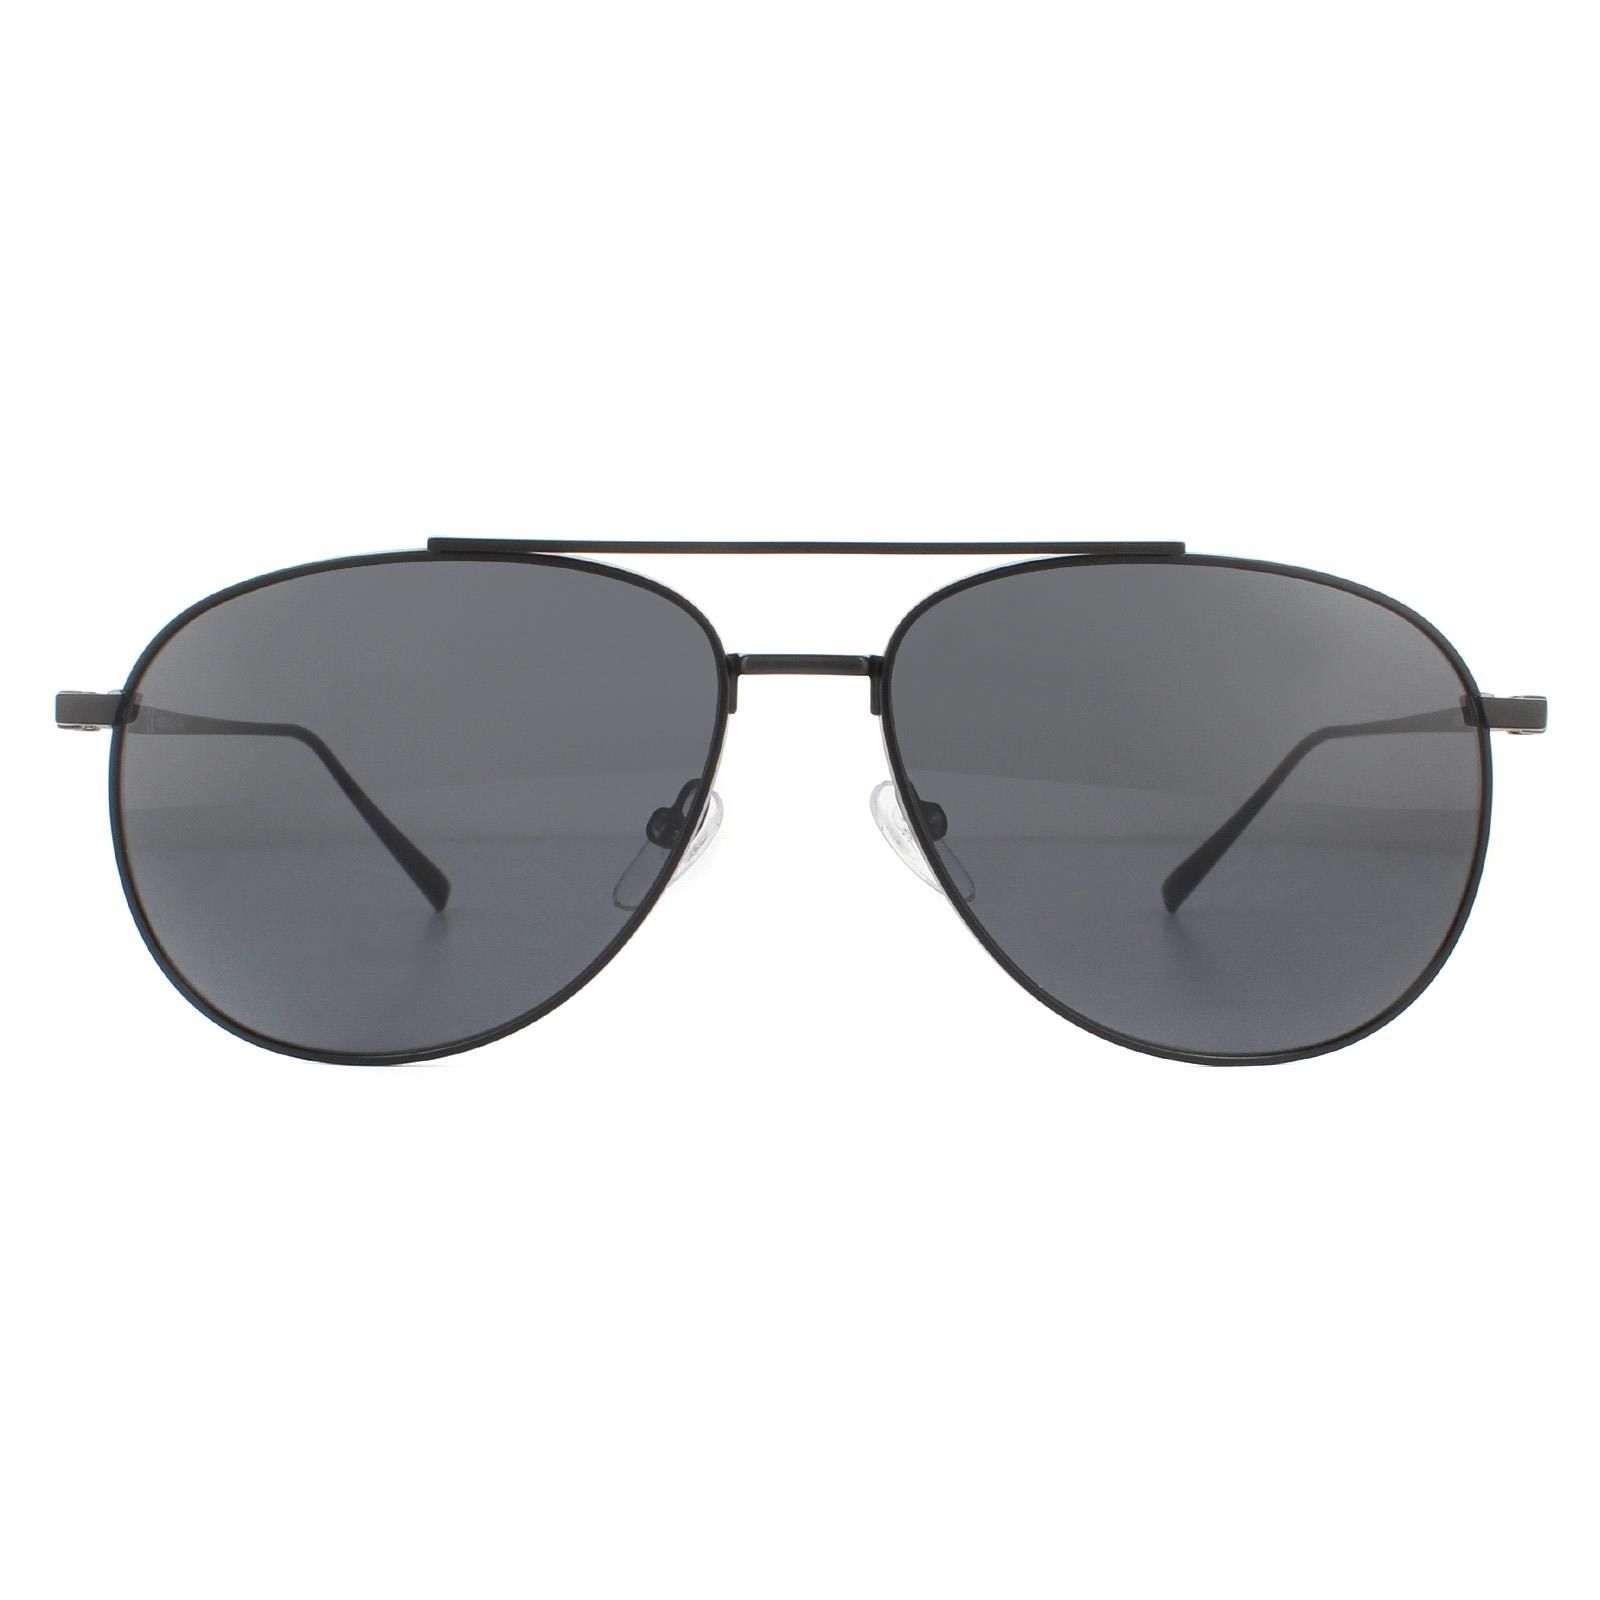 Salvatore Ferragamo Sunglasses SF201S 002 Matte Black Grey are an aviator design crafted from super lightweight metal with ultra thin temples engraved with the Ferragamo logo.